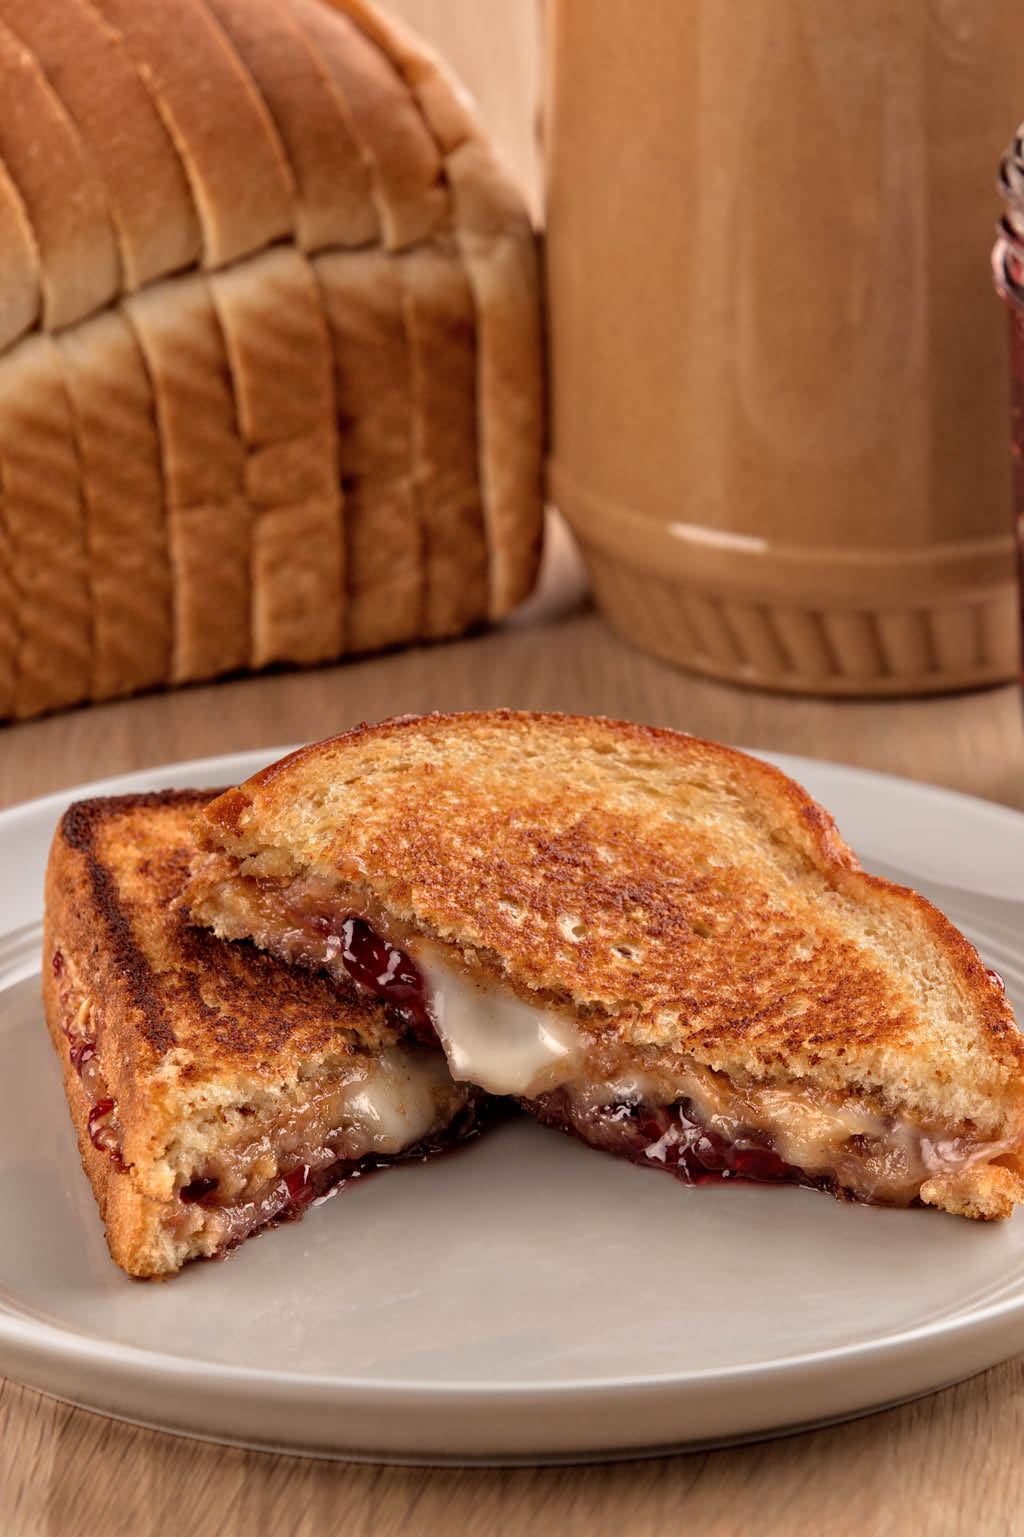 Grilled PB&J with Brie